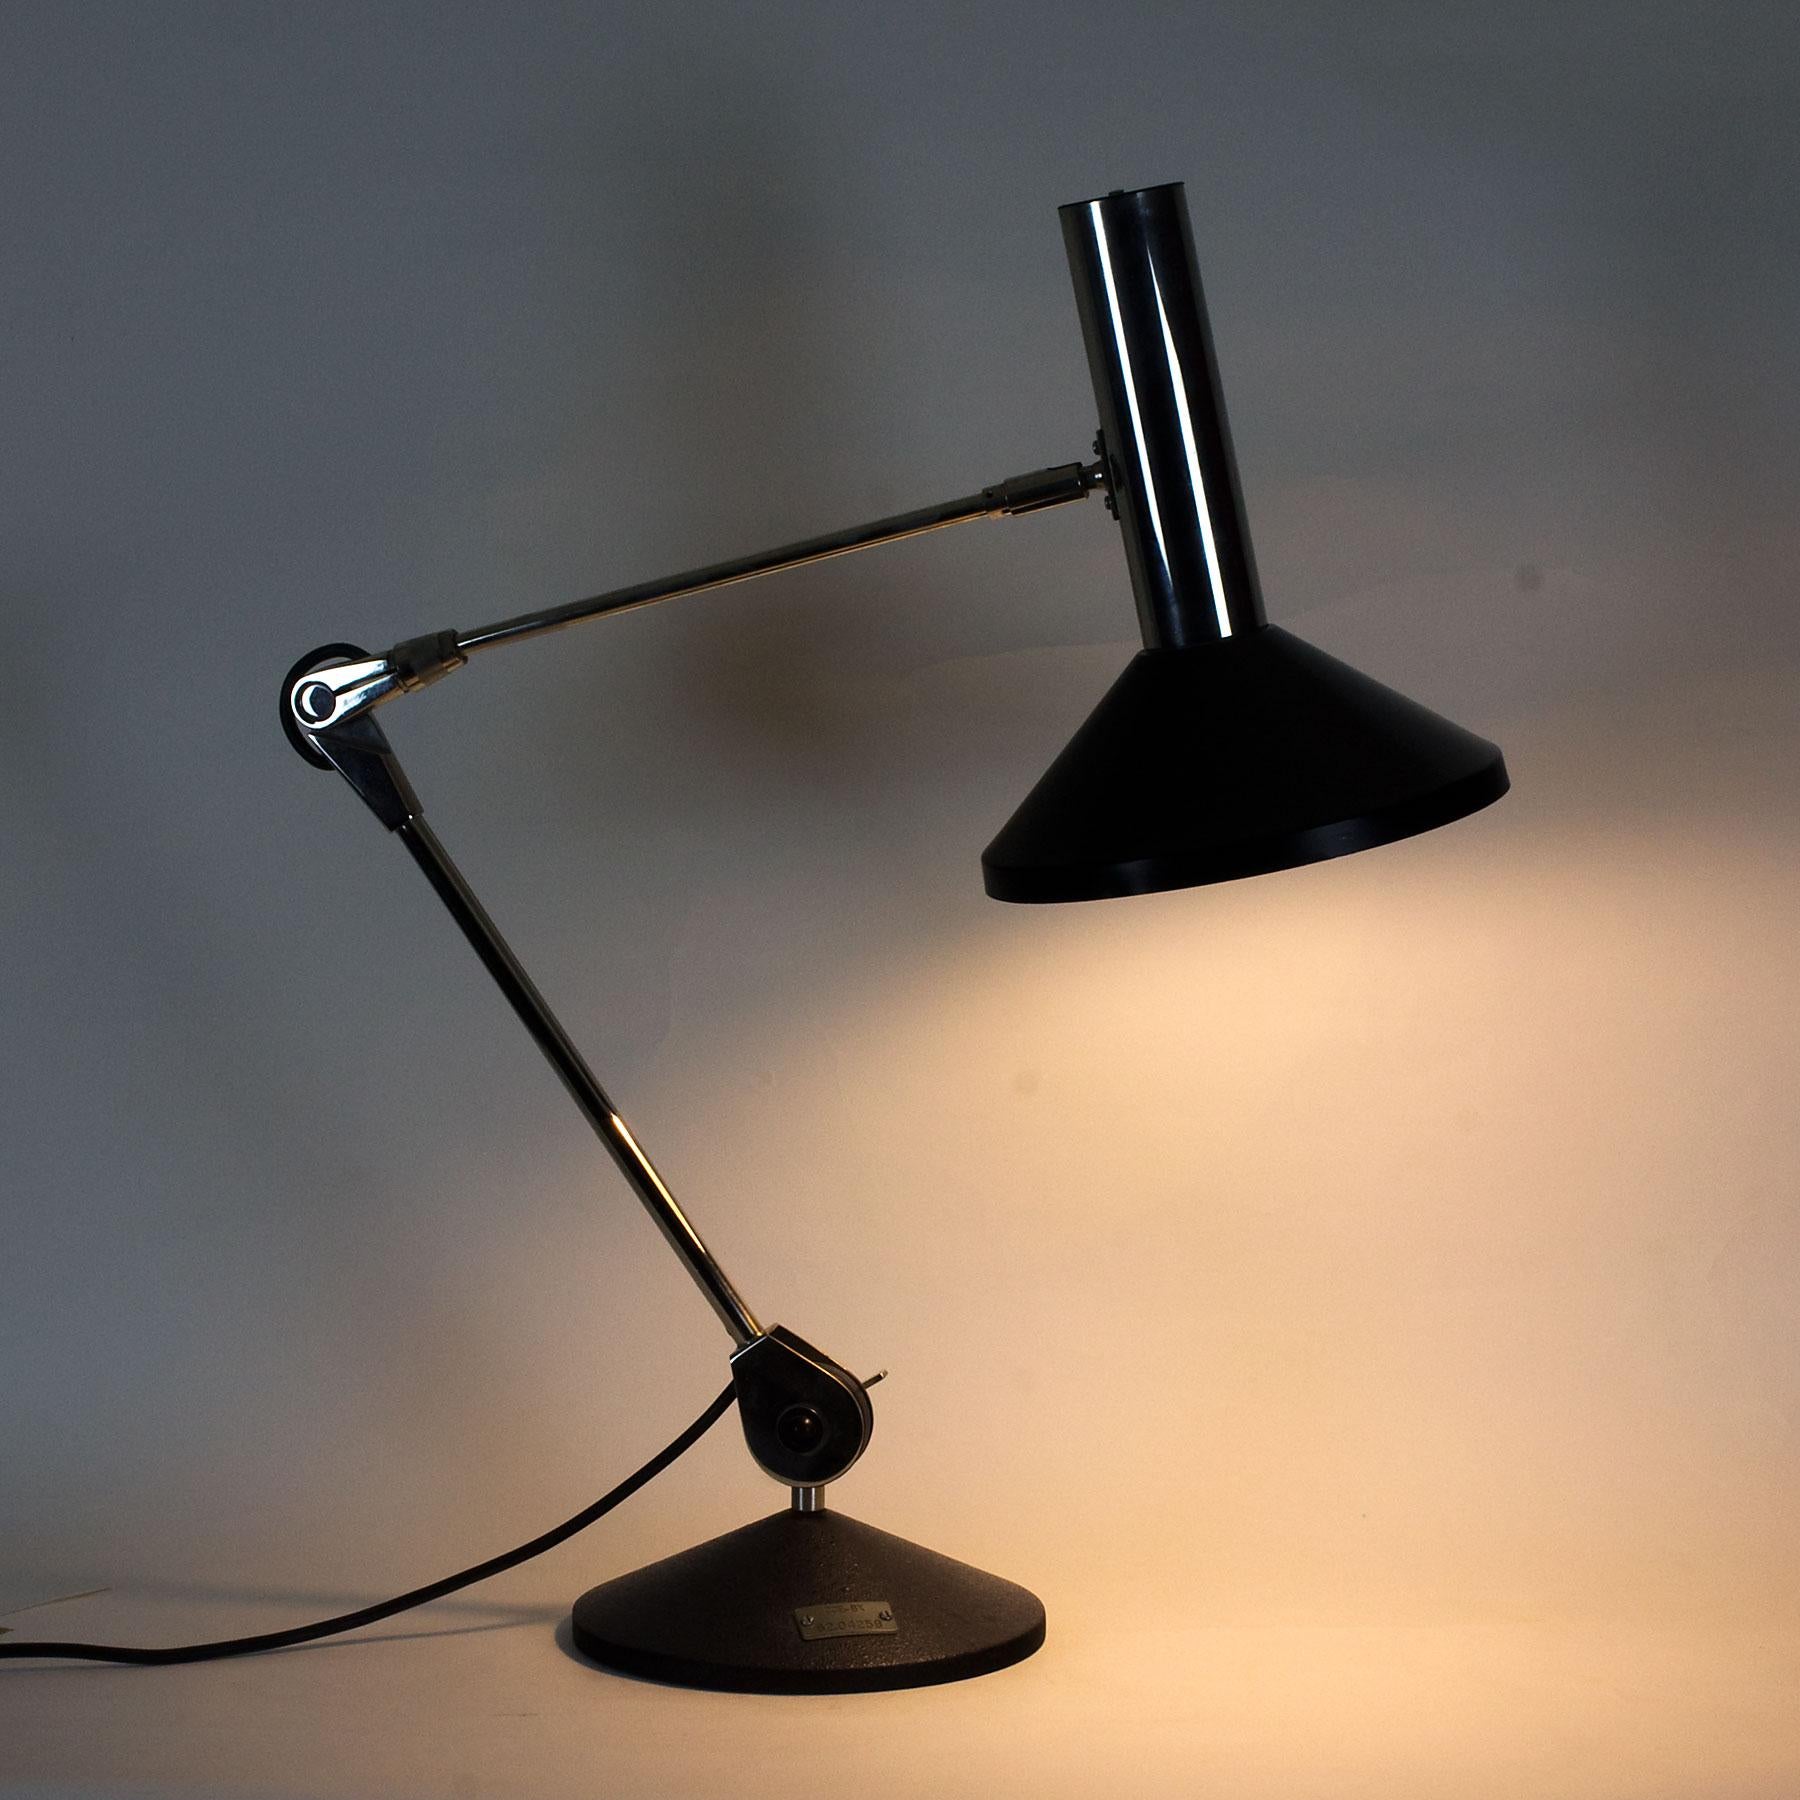  Large Articulated  Mid-Century Modern Chrome-Plated Desk Lamp - Belgium, 1960s For Sale 3